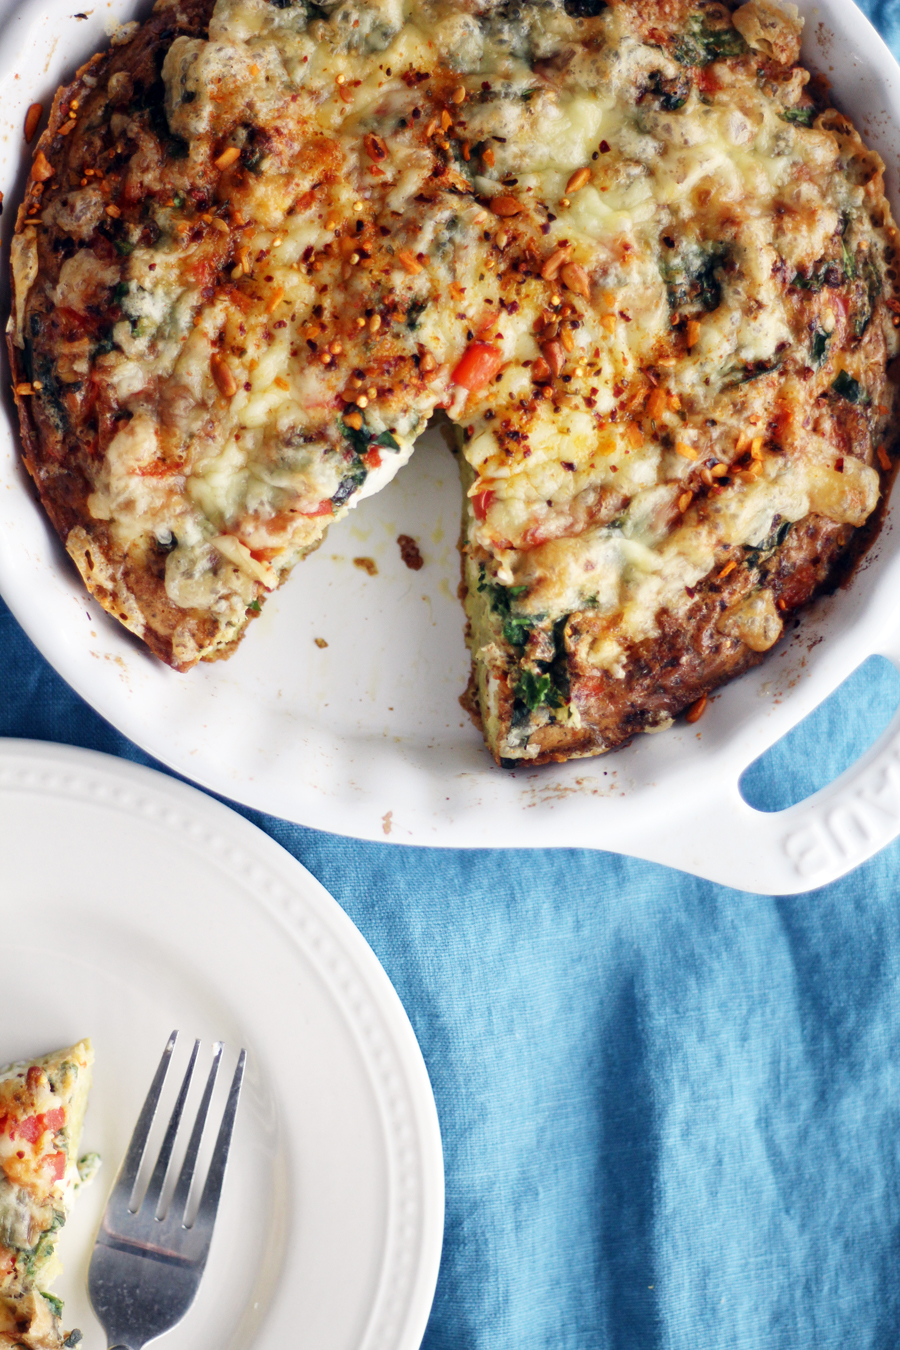 A wholesome and nutritious breakfast that is easy and filling. Farmers Baked Omelette